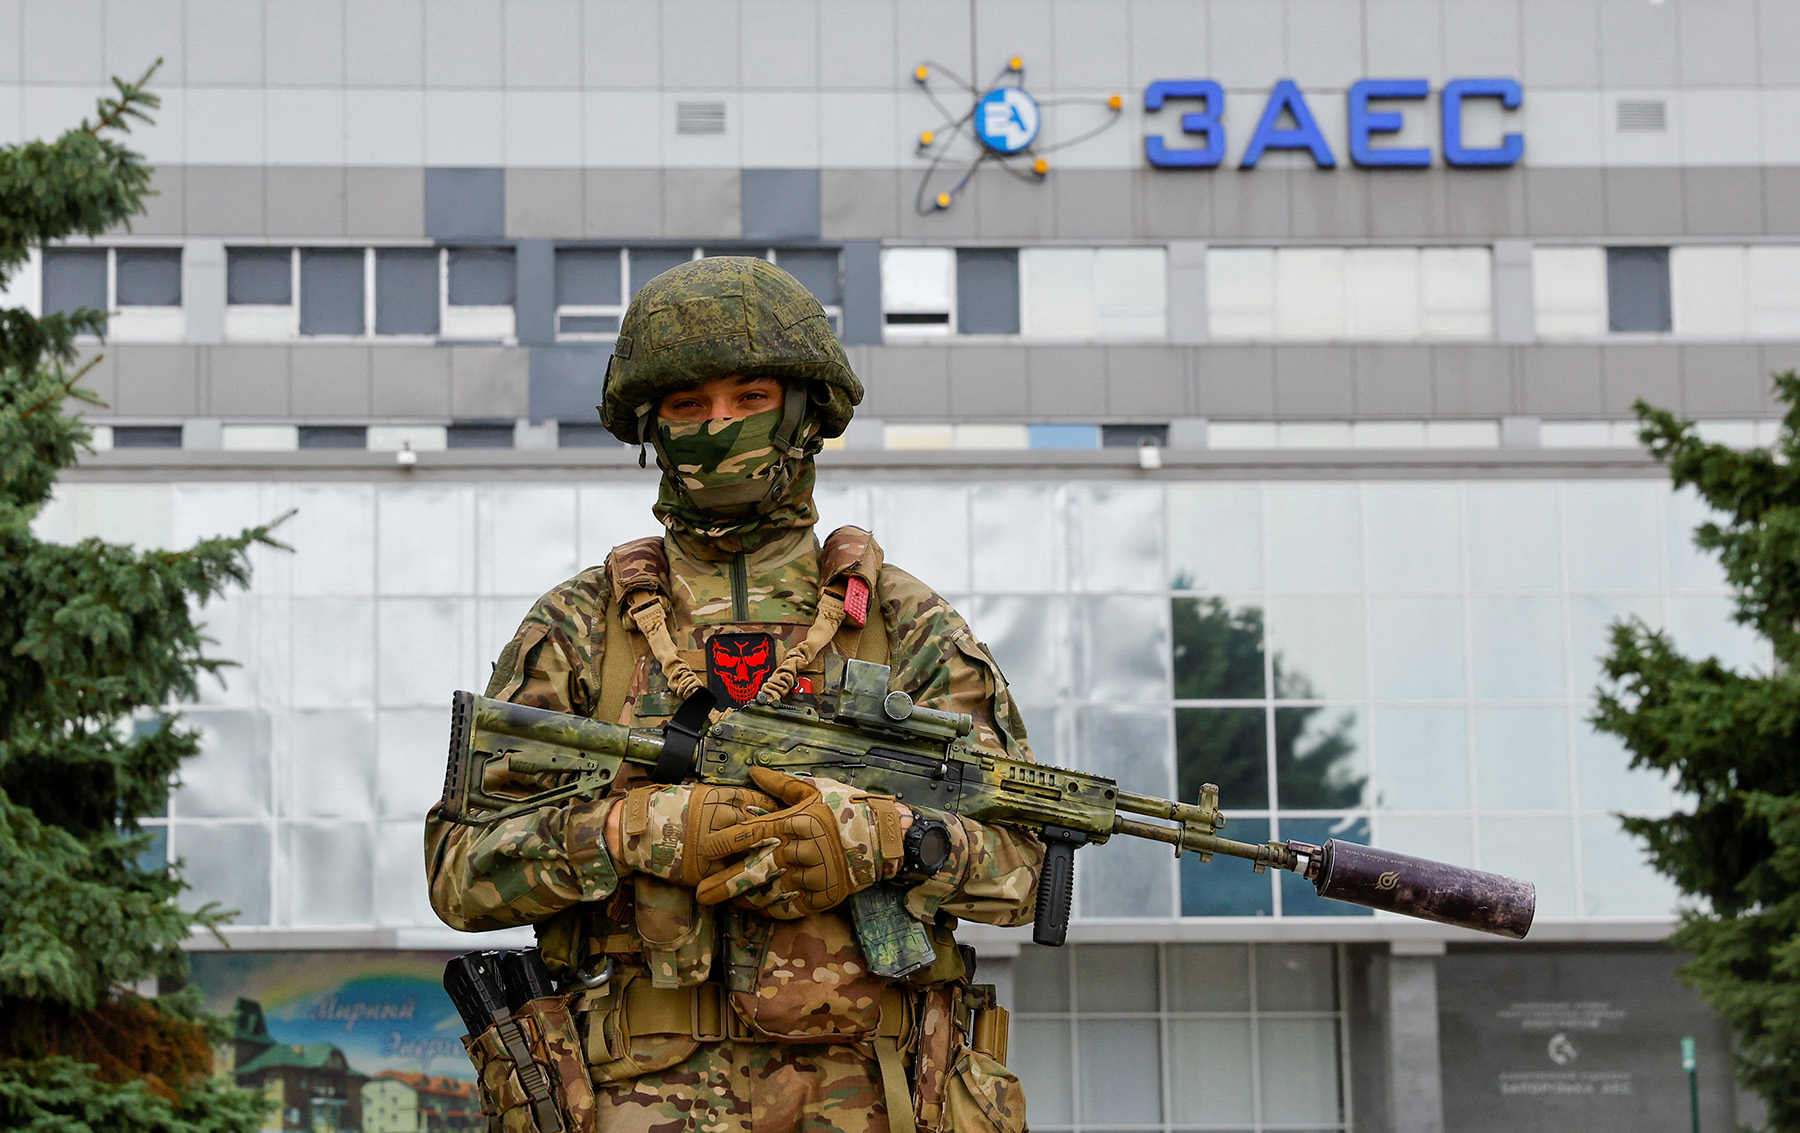 A Russian soldier stands guard near the Russian-controlled Zaporizhzhia nuclear power plant following the arrival of the International Atomic Energy Agency (IAEA) expert mission in Ukraine, on September 1.